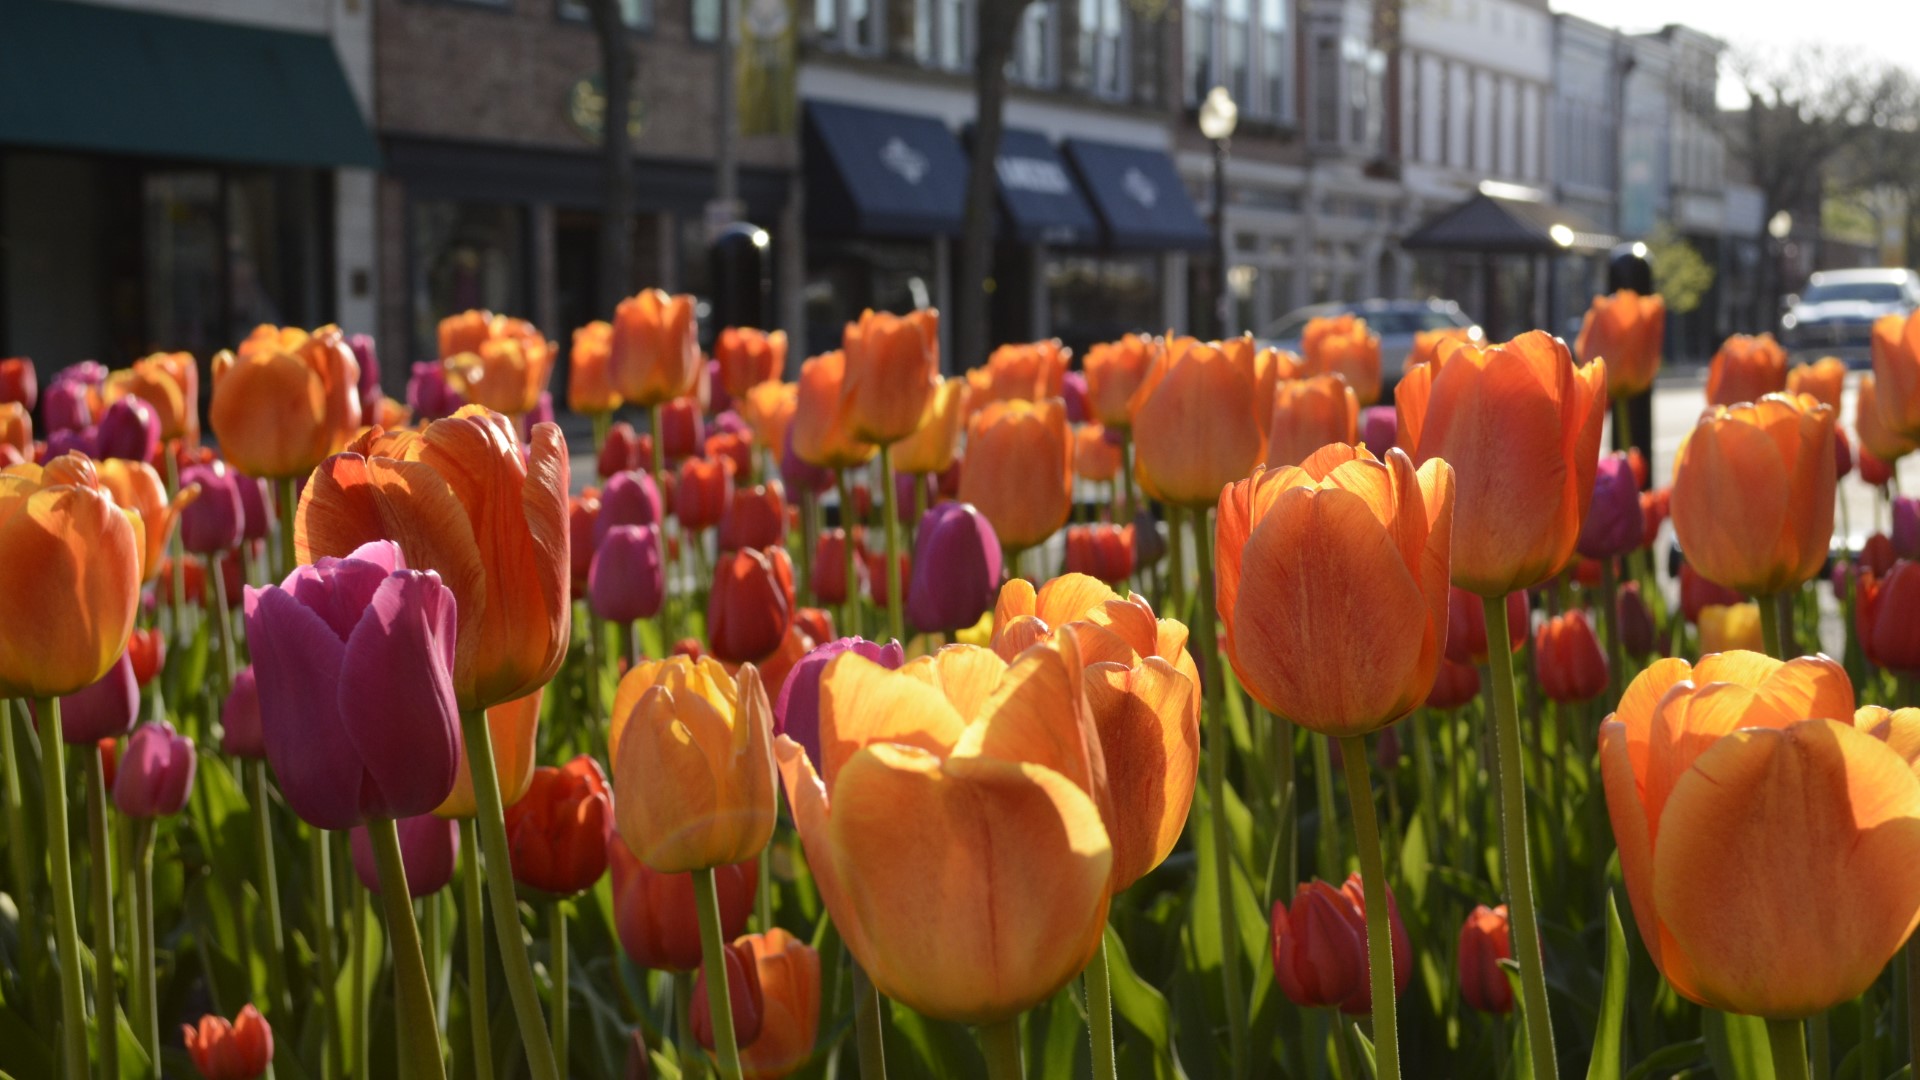 Registration for 2020 Tulip Time Run now open